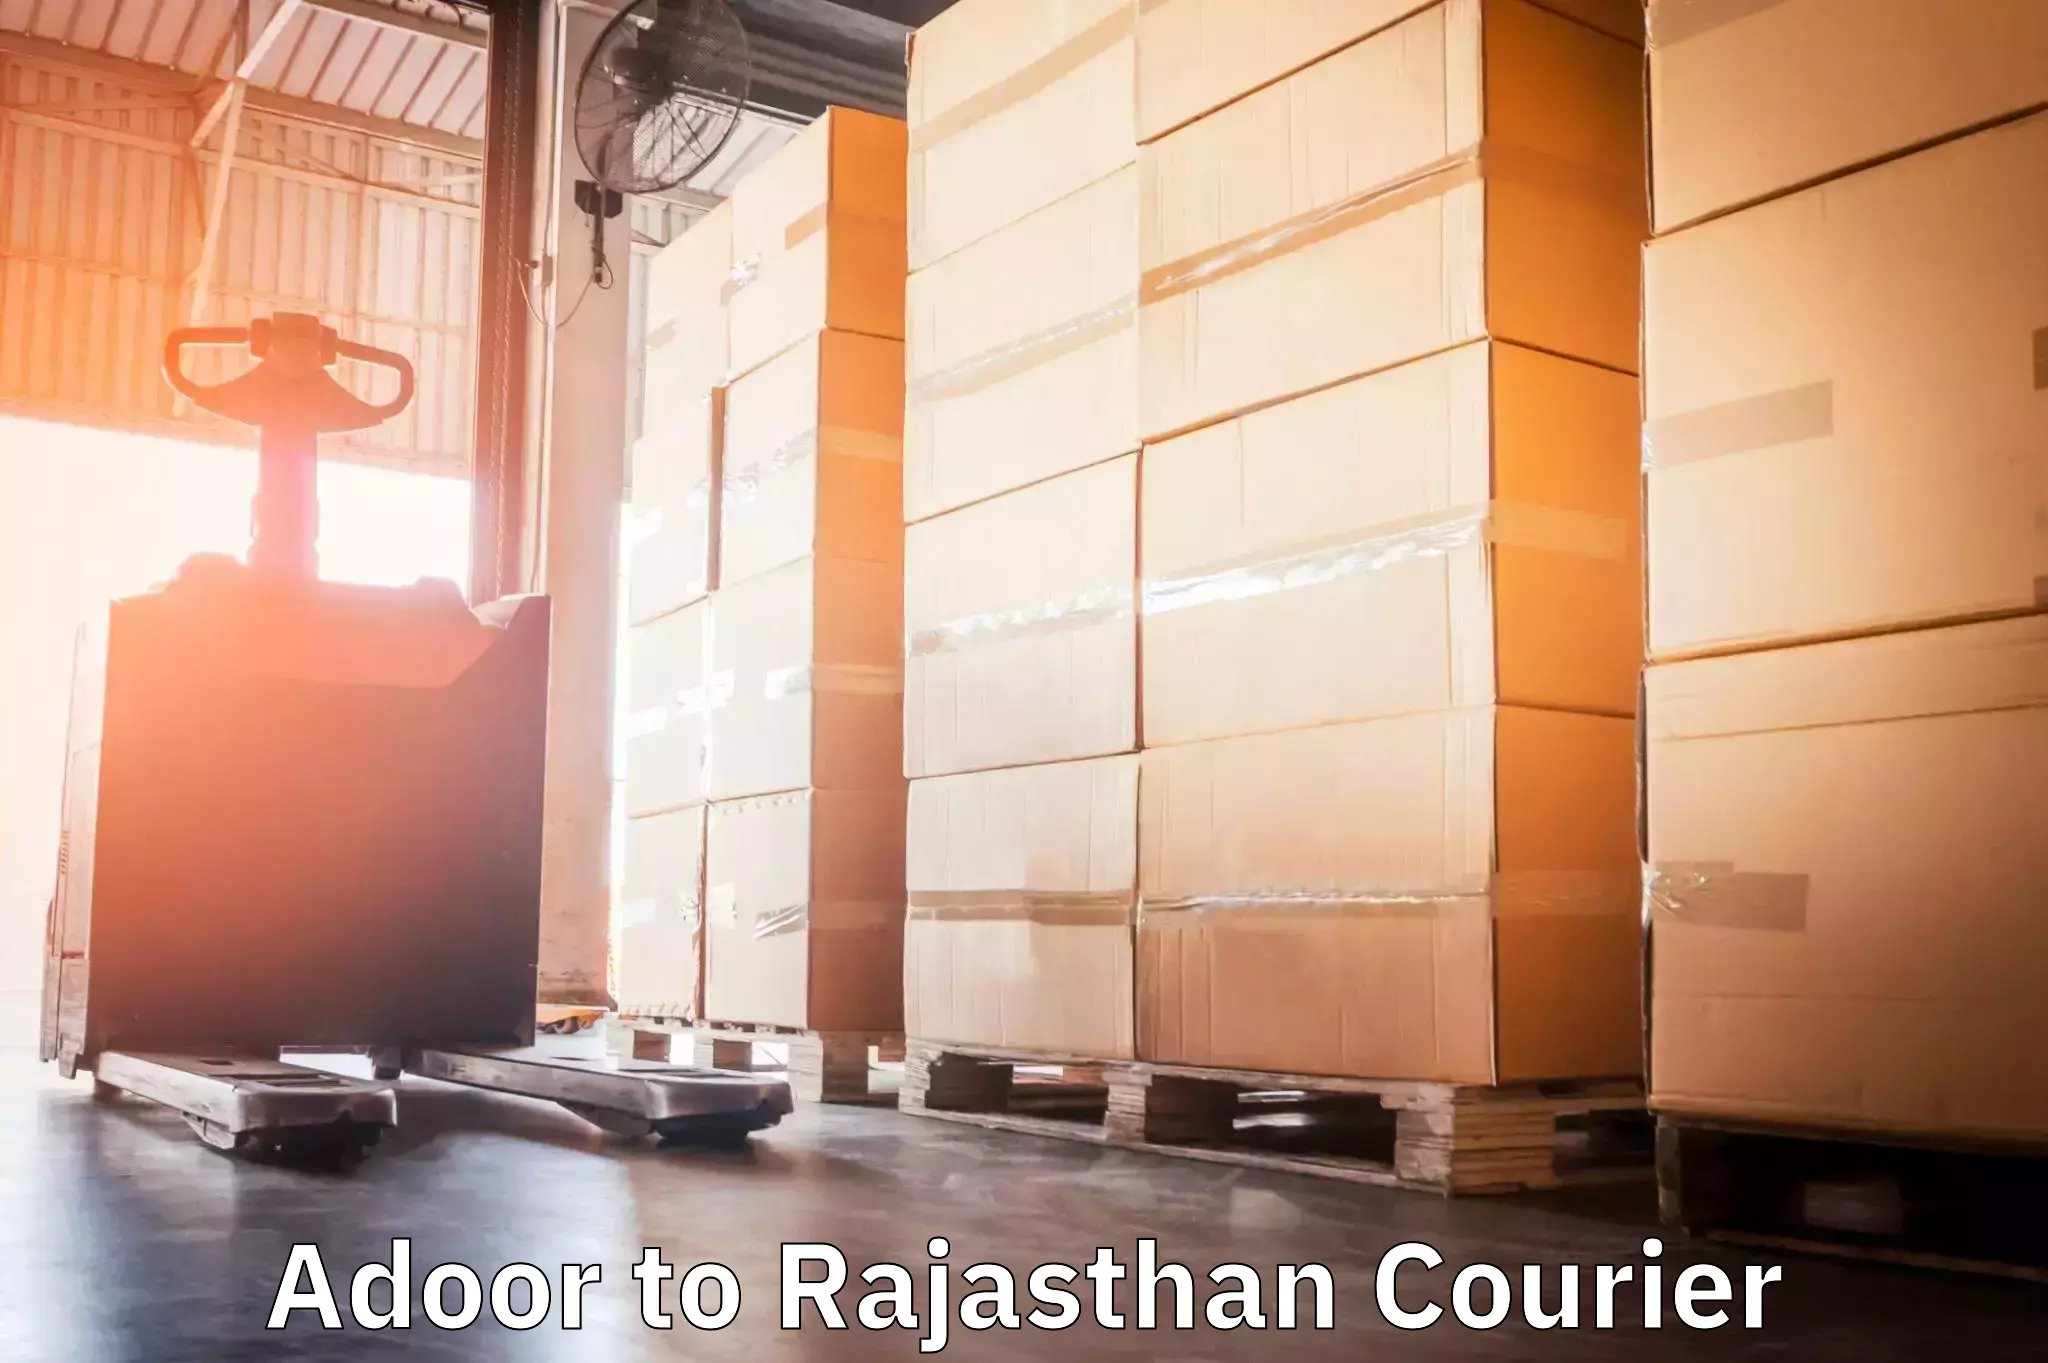 Next-day freight services Adoor to Rajasthan